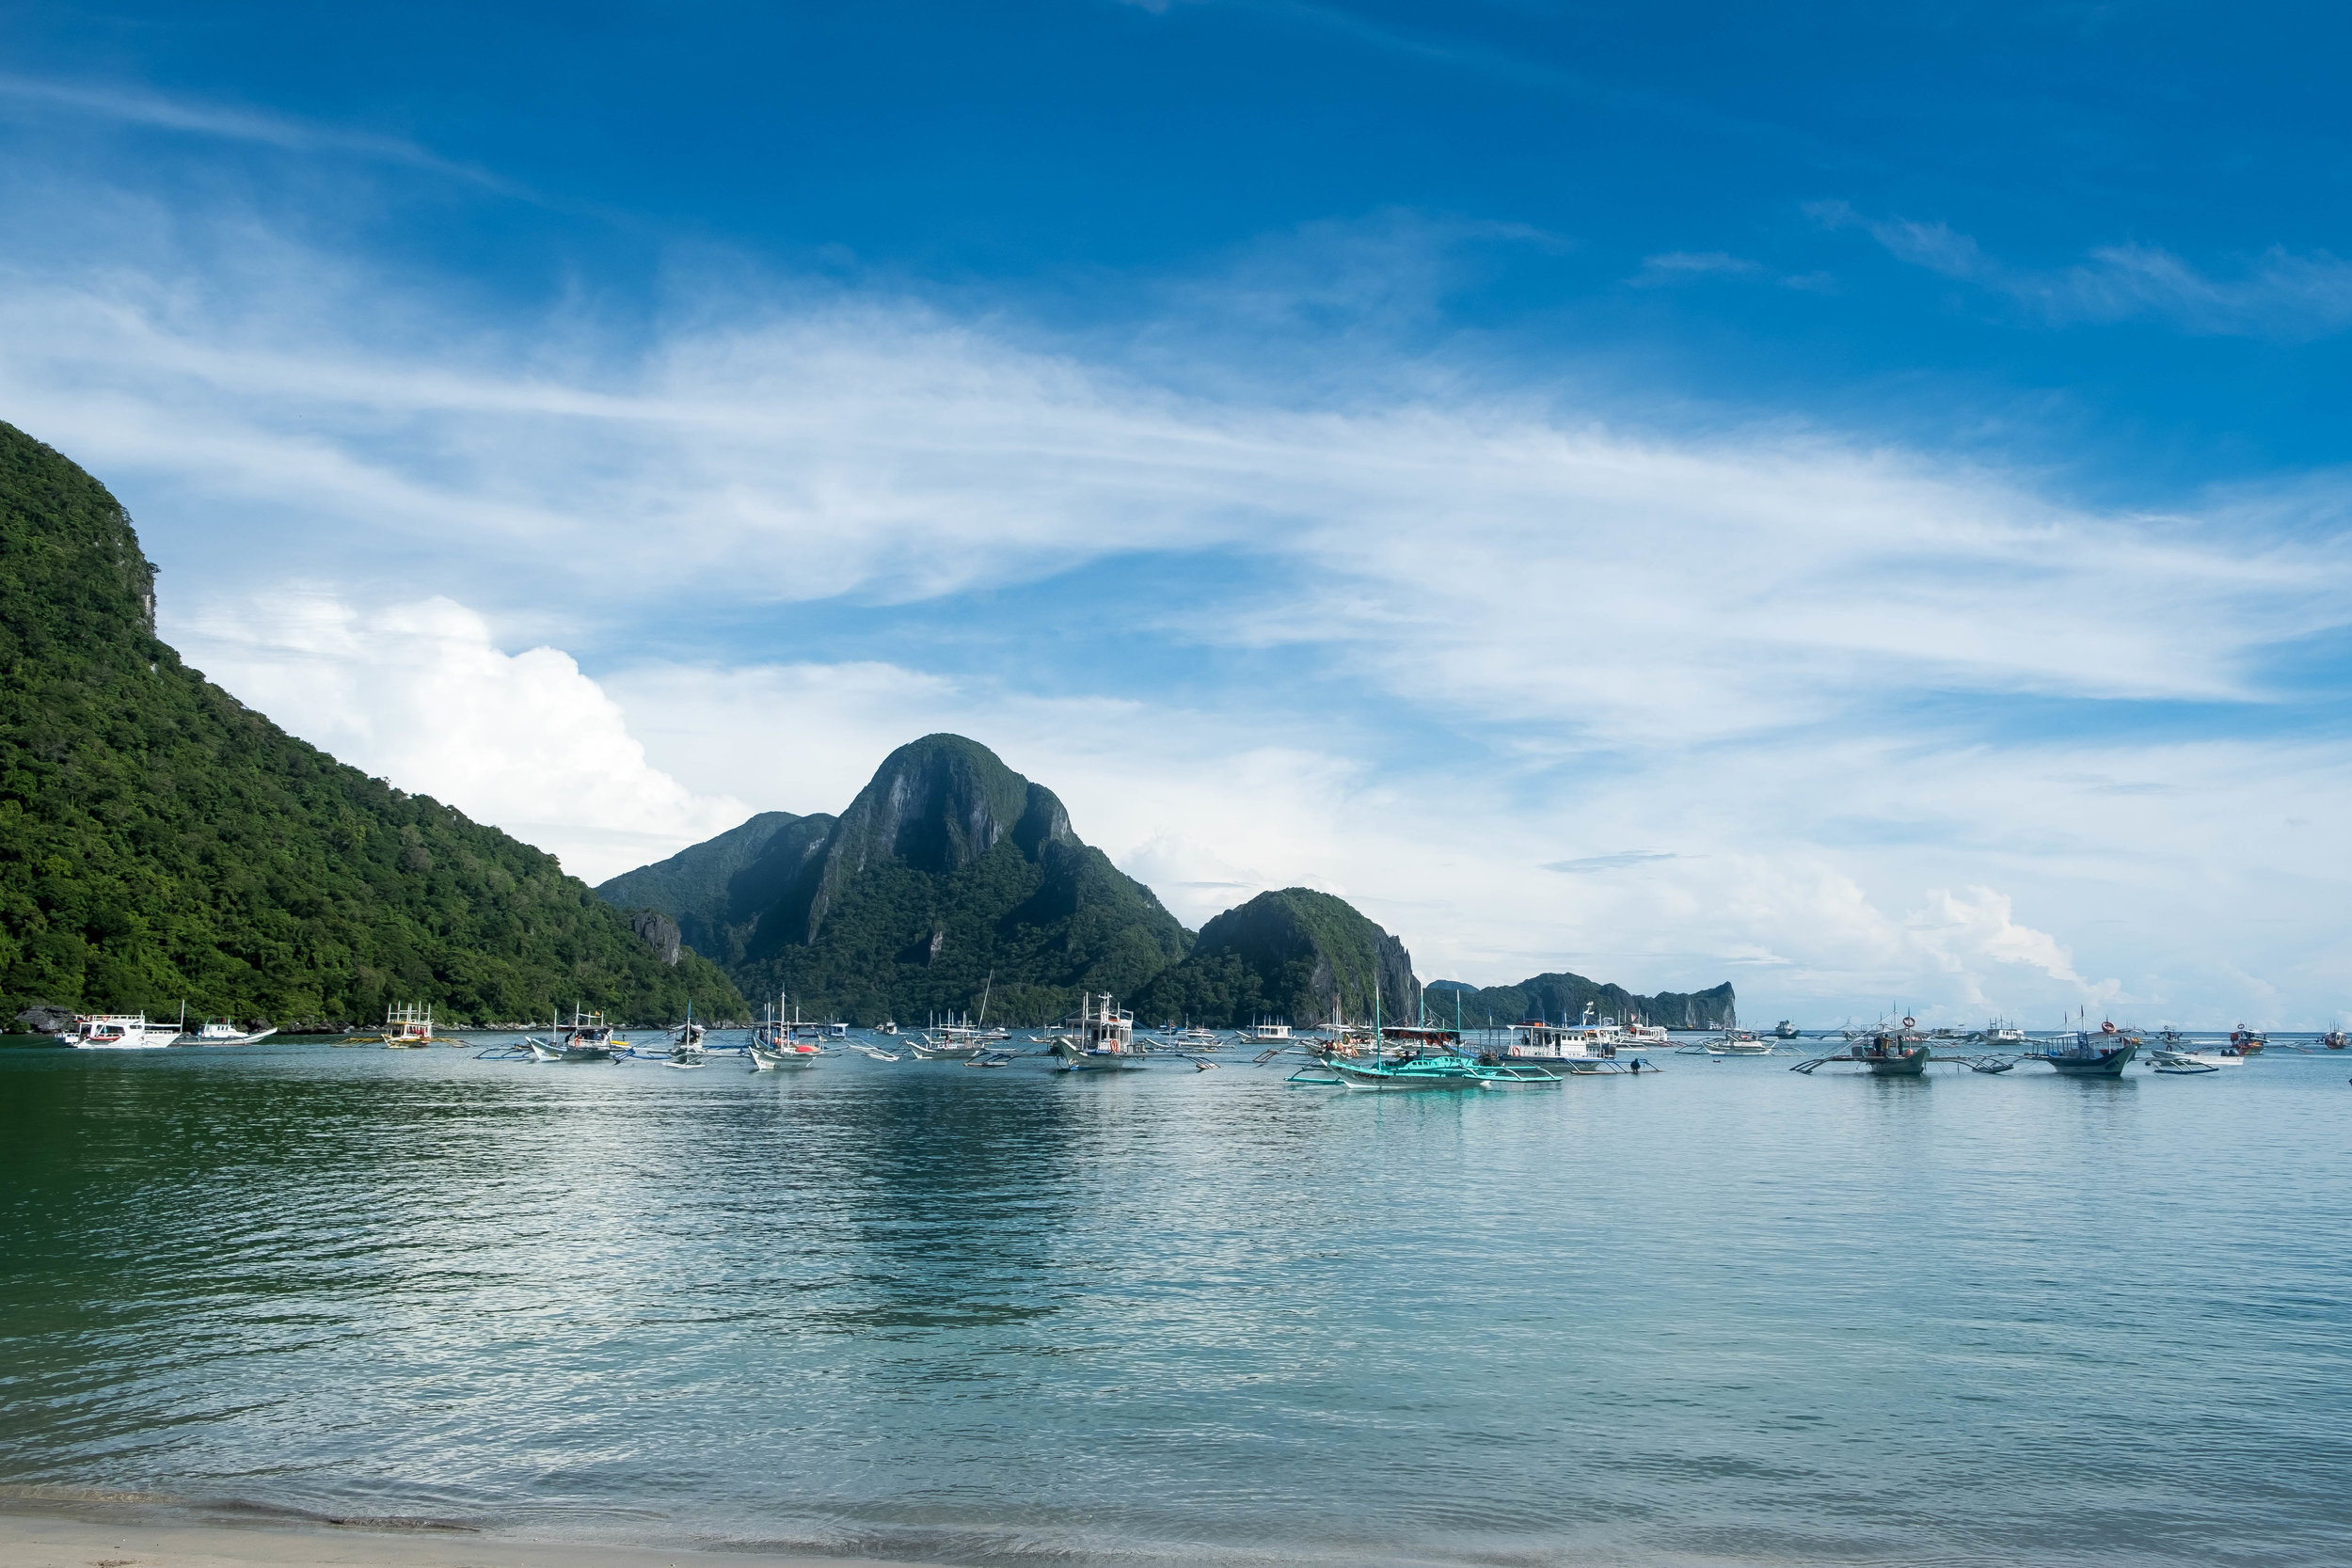  View from the beach in El Nido 